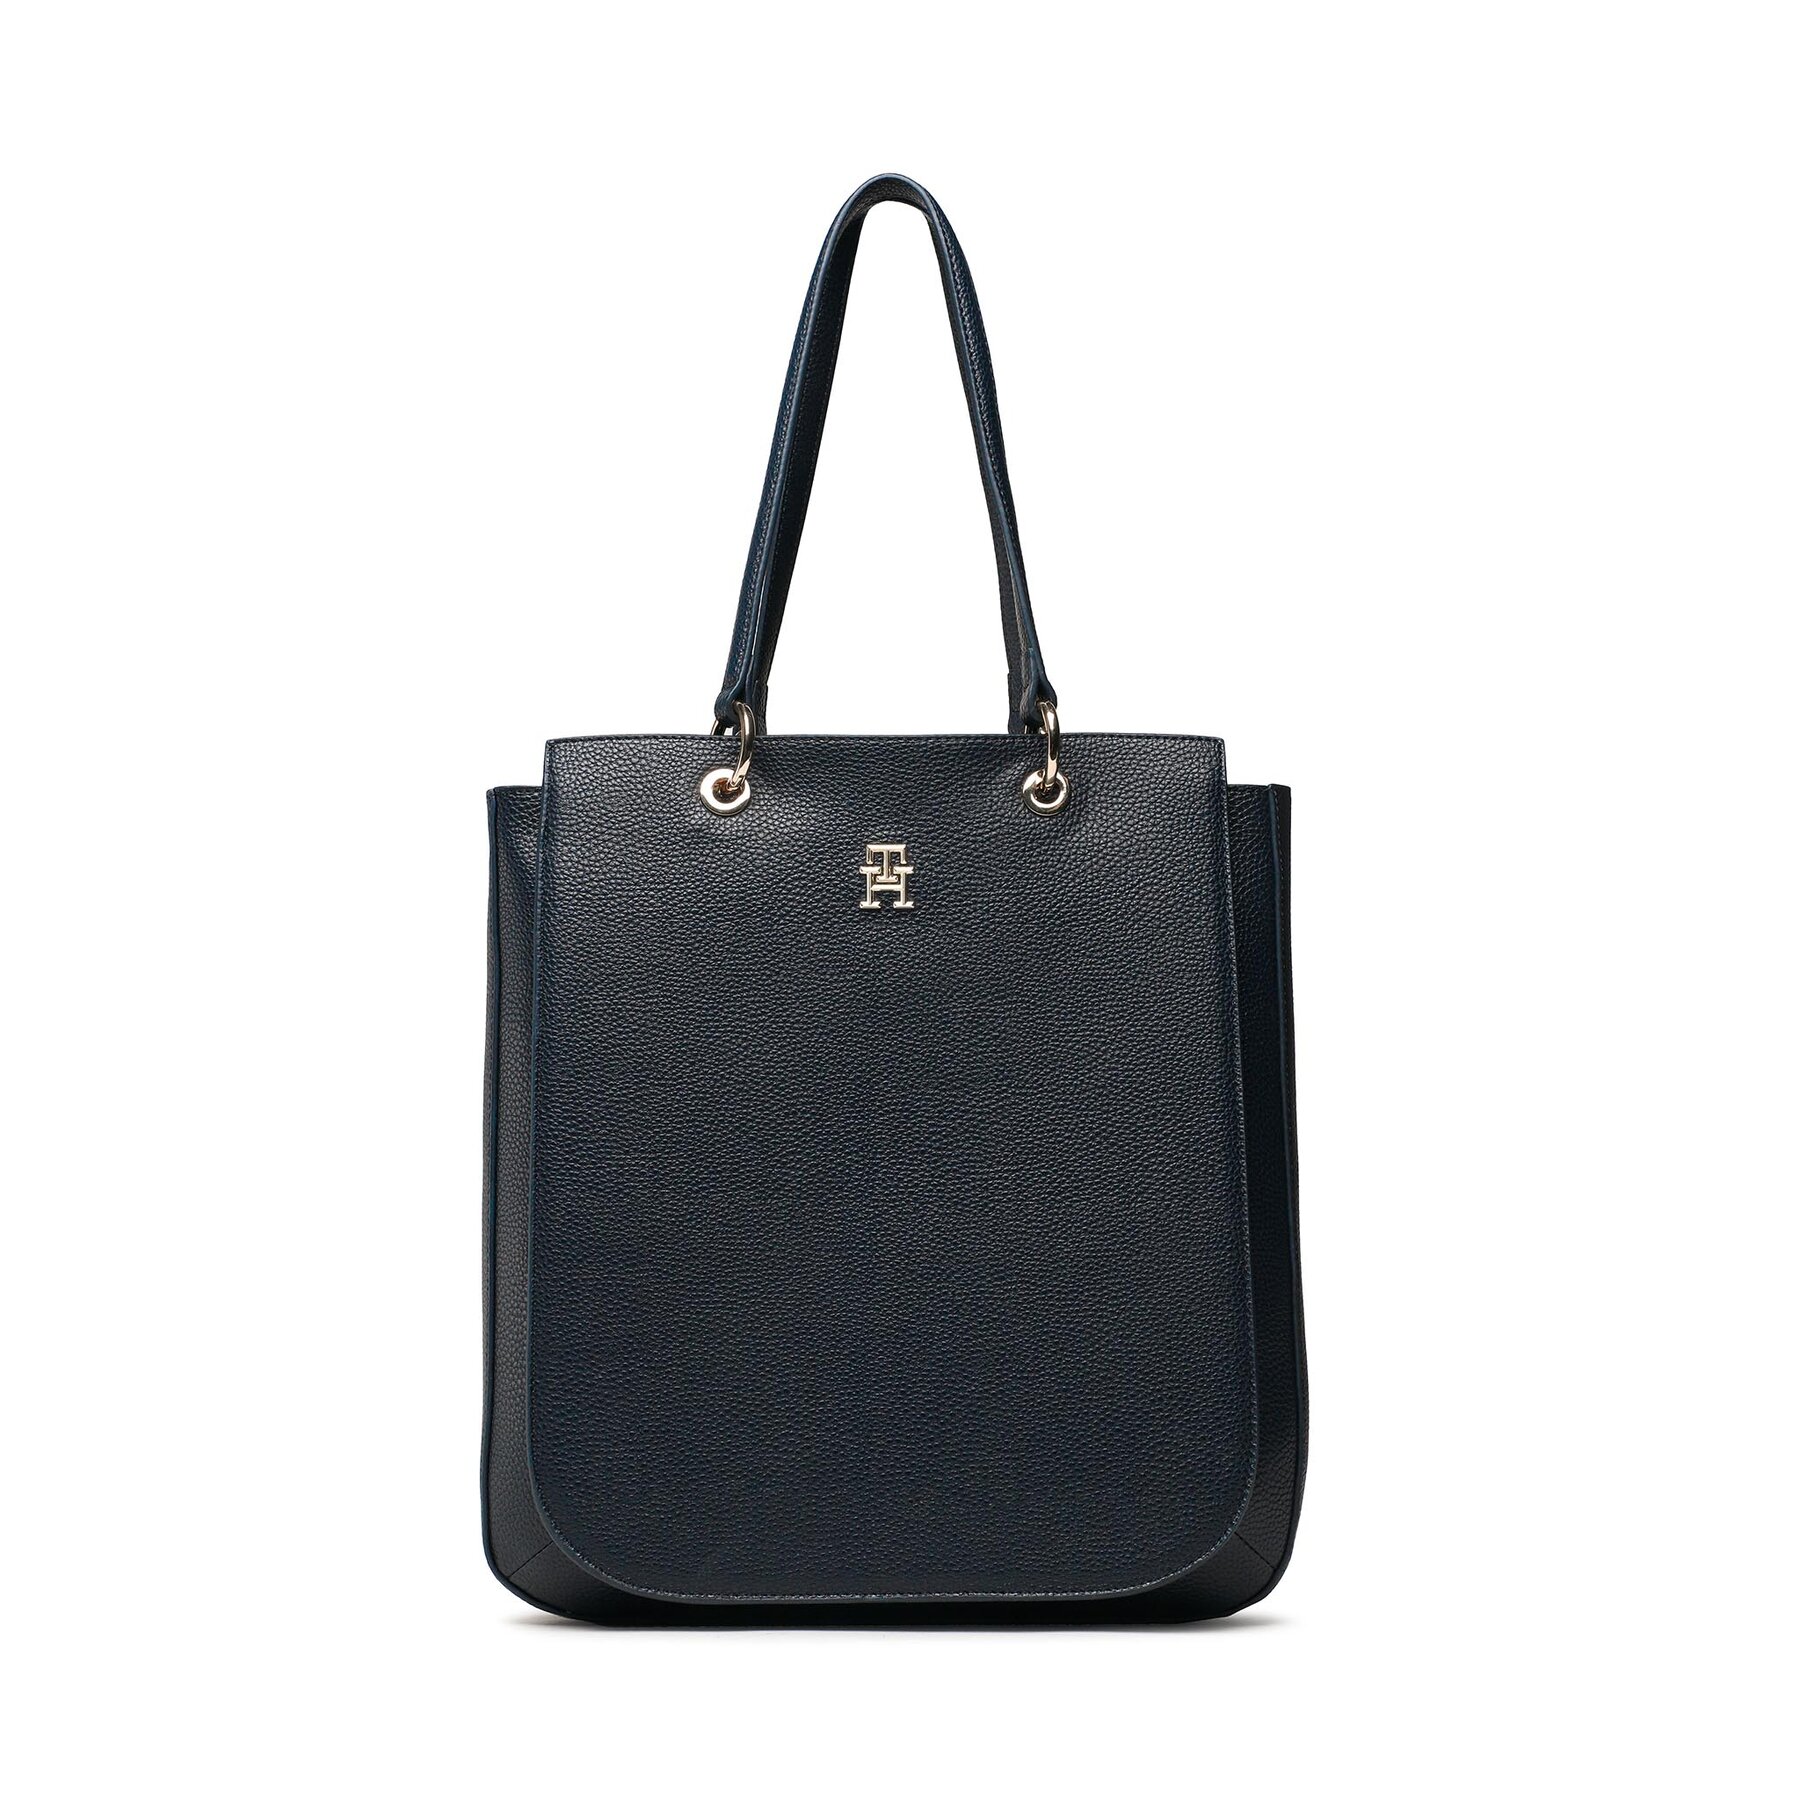 Geantă Tommy Hilfiger Th Emblem Ns Work Tote AW0AW14498 DW6 AW0AW14498 imagine super redus 2022